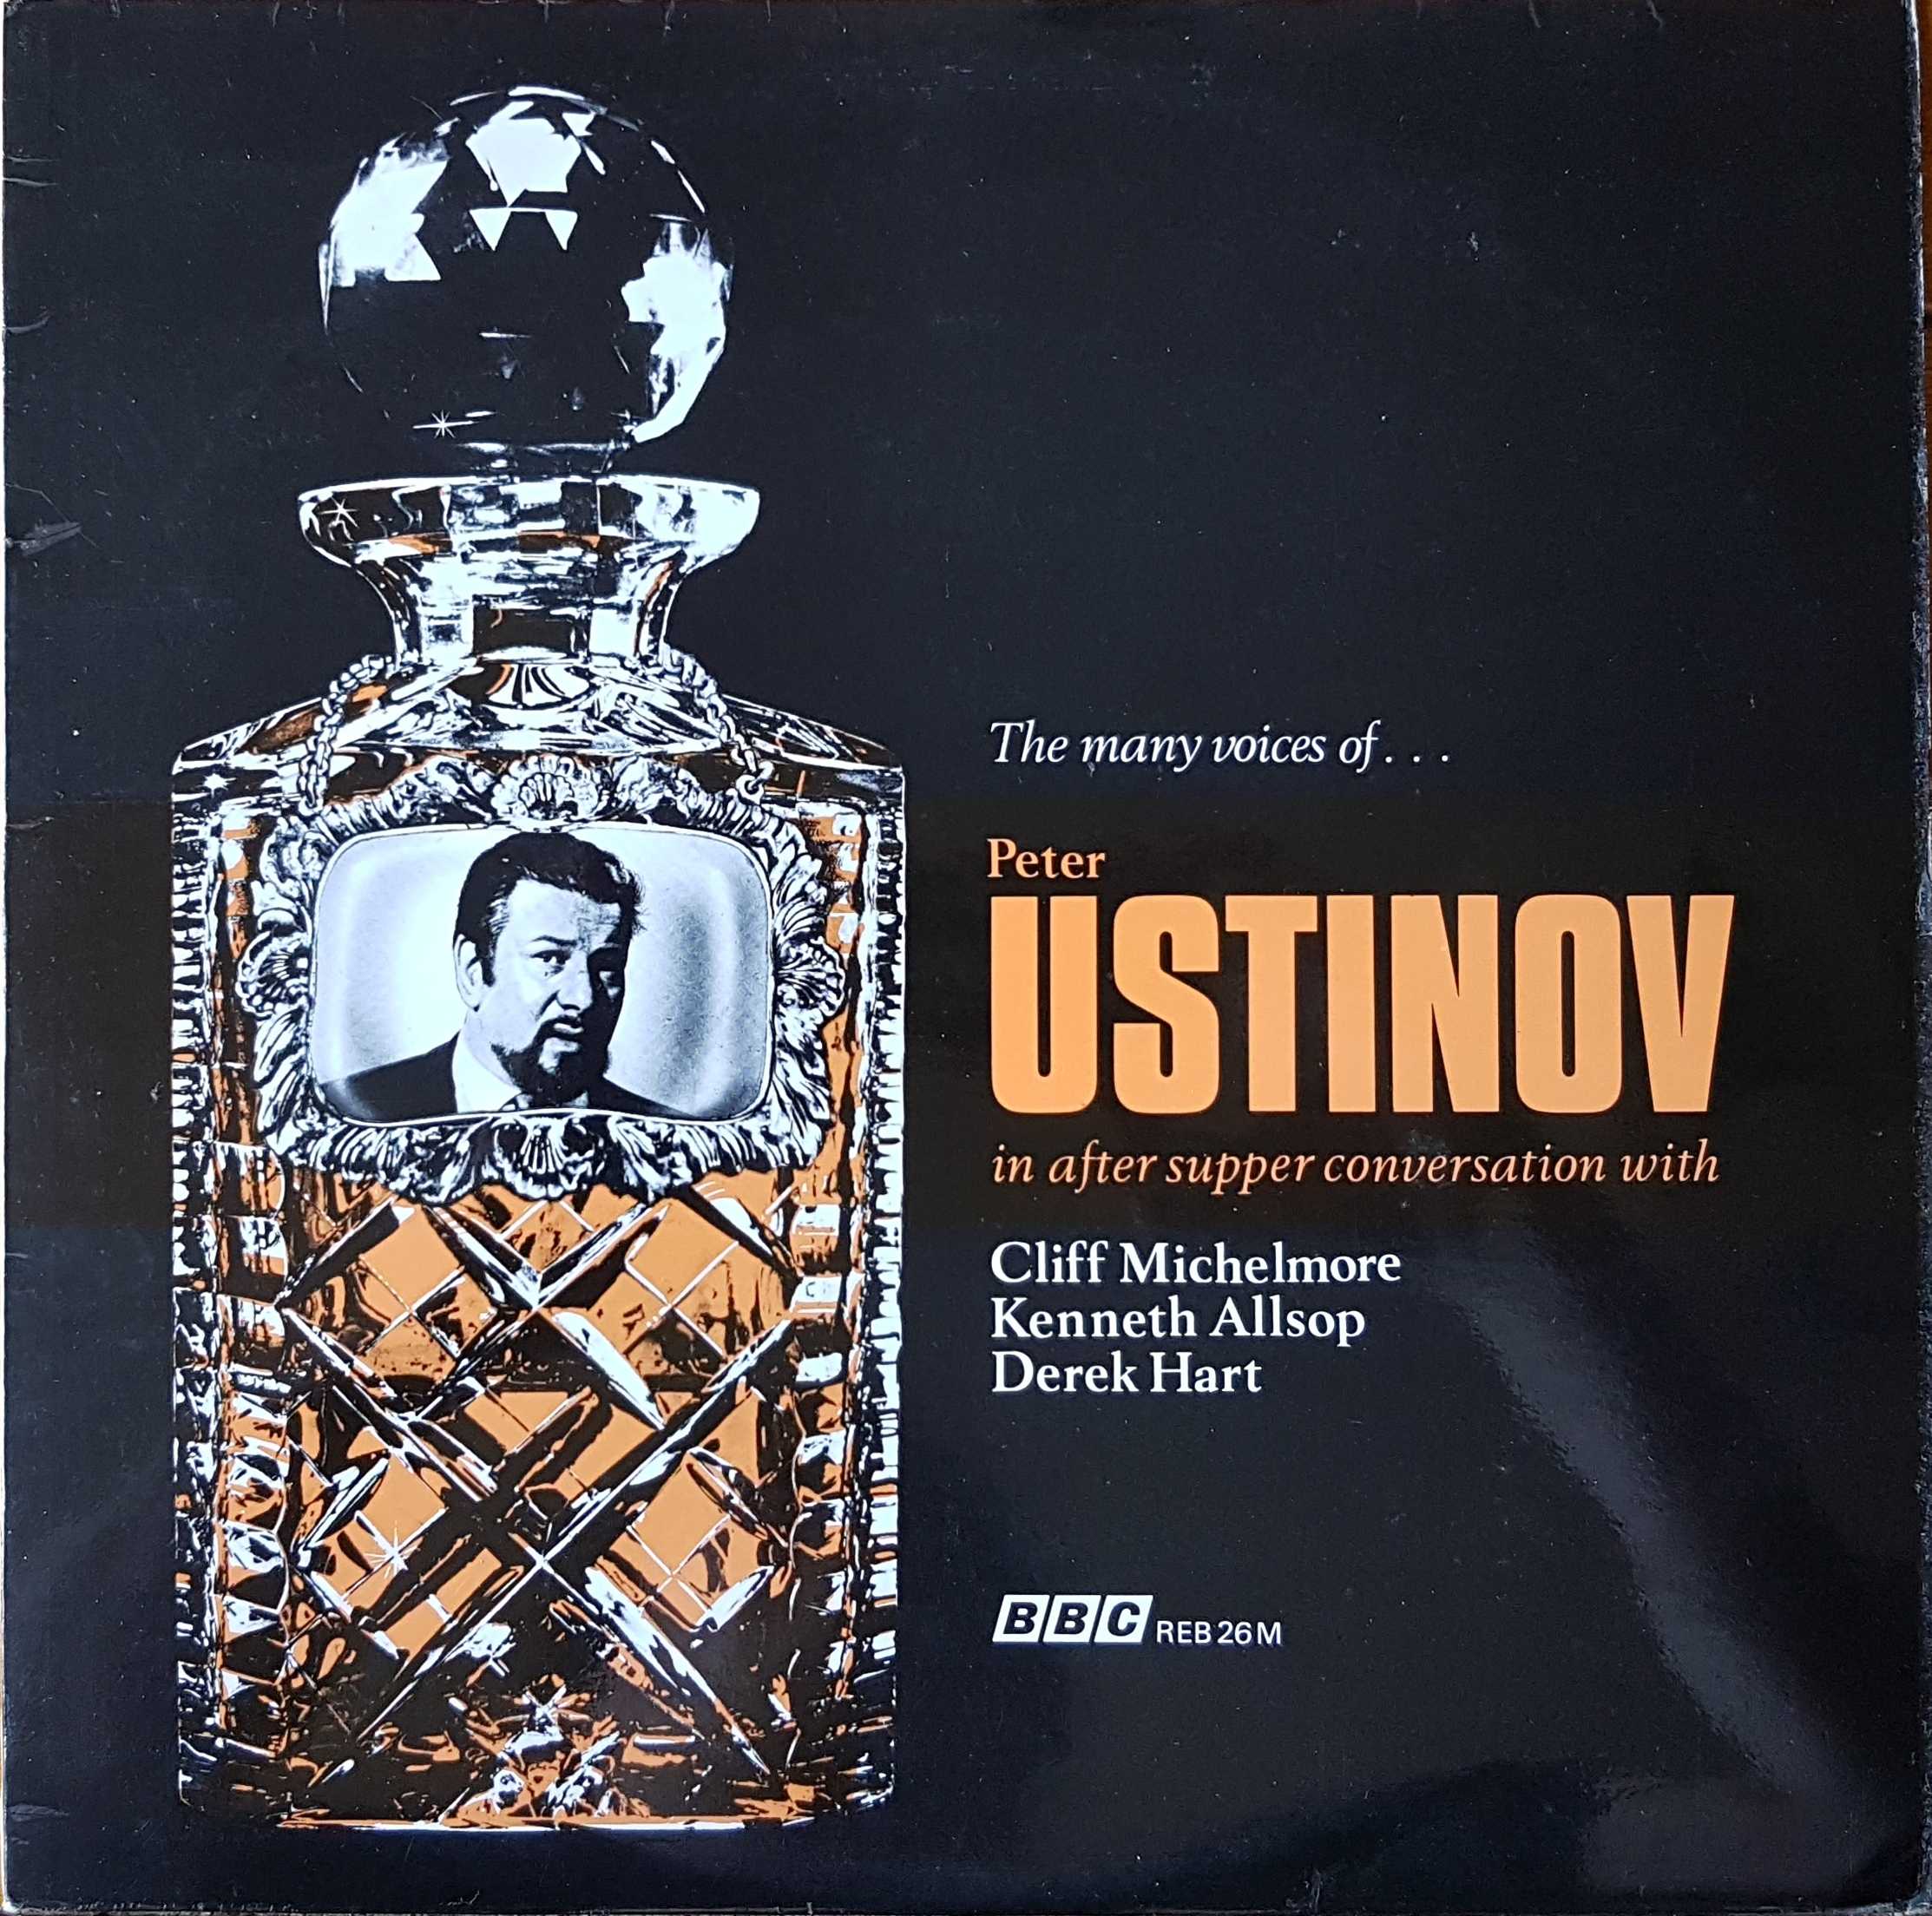 Picture of REB 26 The many voices of Peter Ustinov by artist Peter Ustinov from the BBC albums - Records and Tapes library